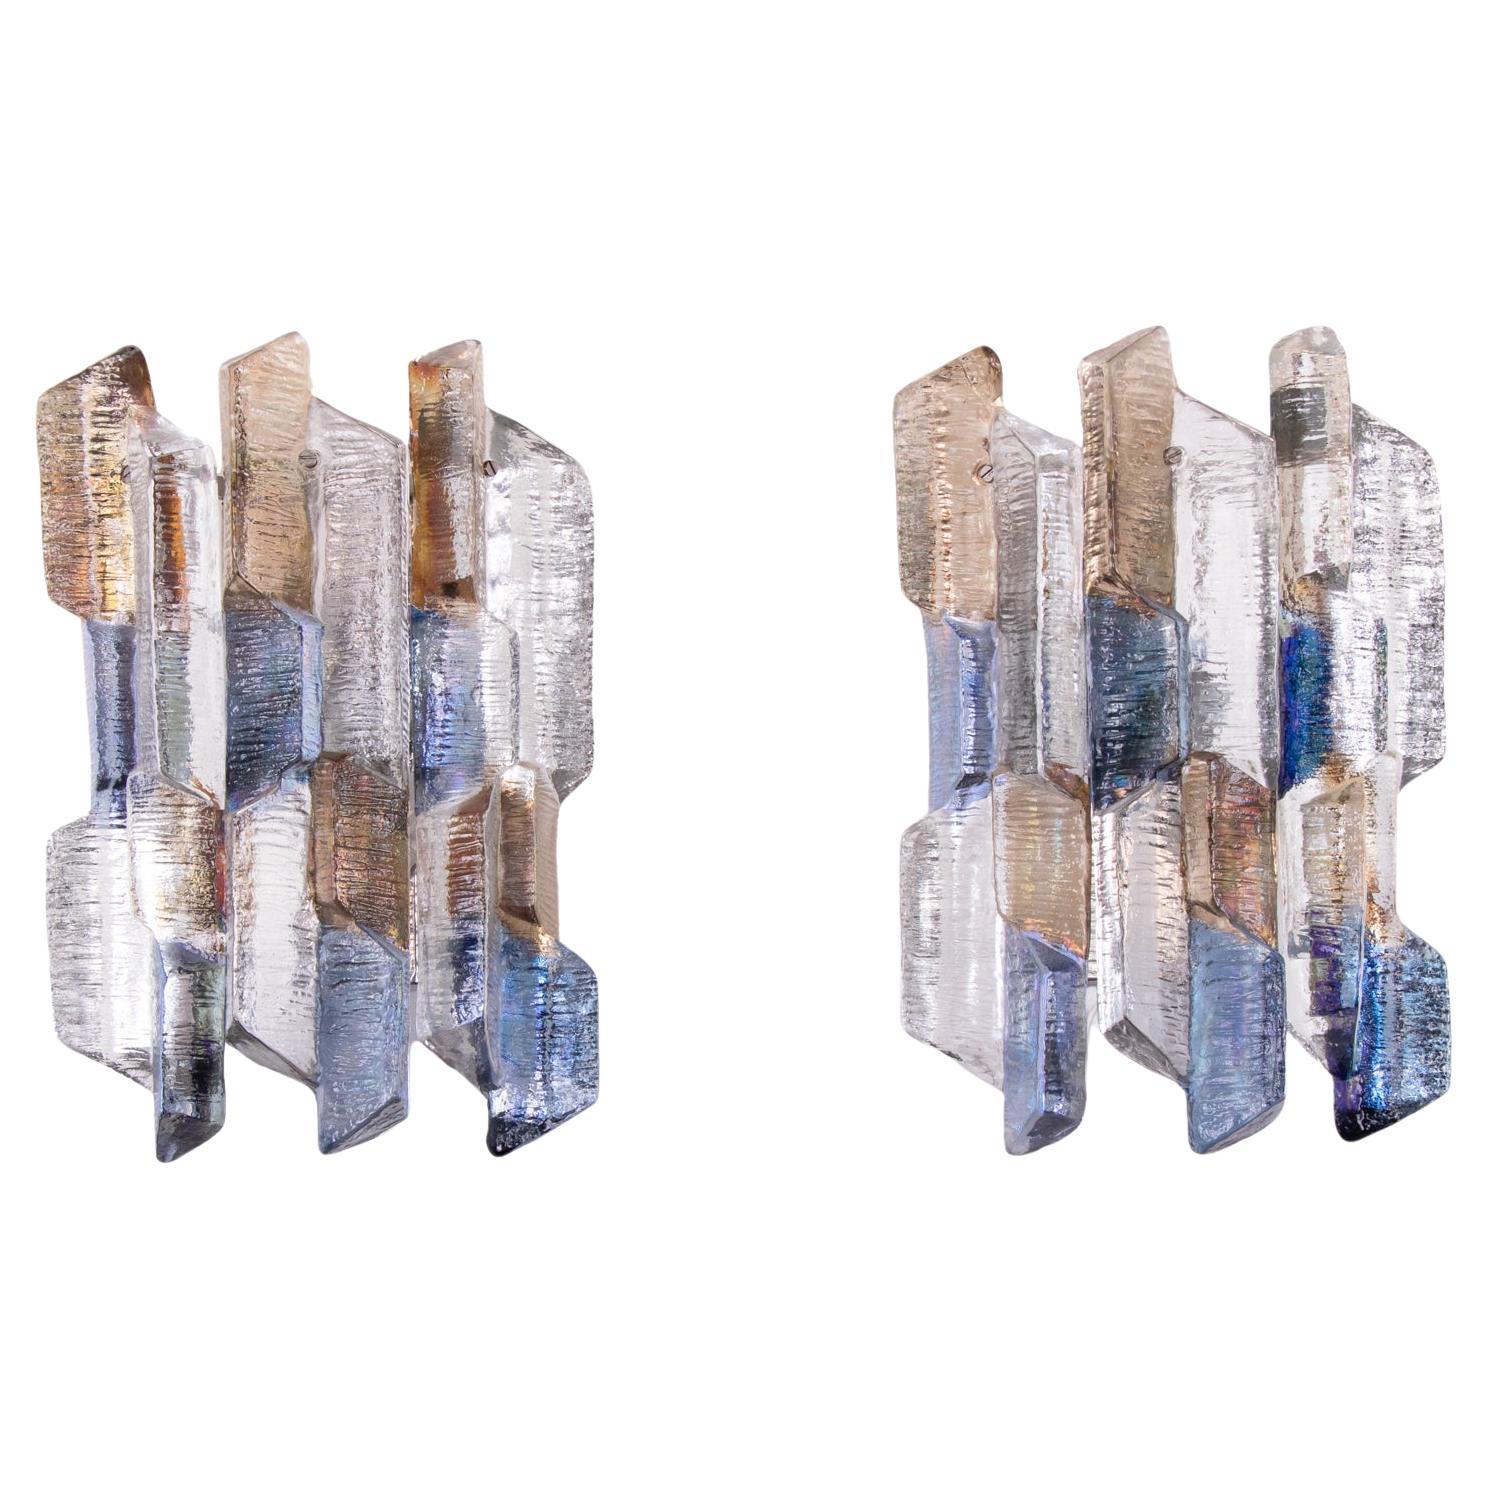 Elegant pair of multicolored Murano glass wall lights designed by J.T. Kalmar made of six textured clear glass elements with blue, amber and clear tinting suspended on a nickel backplate. 

Beautiful play of light and colors when lit. Gem from the